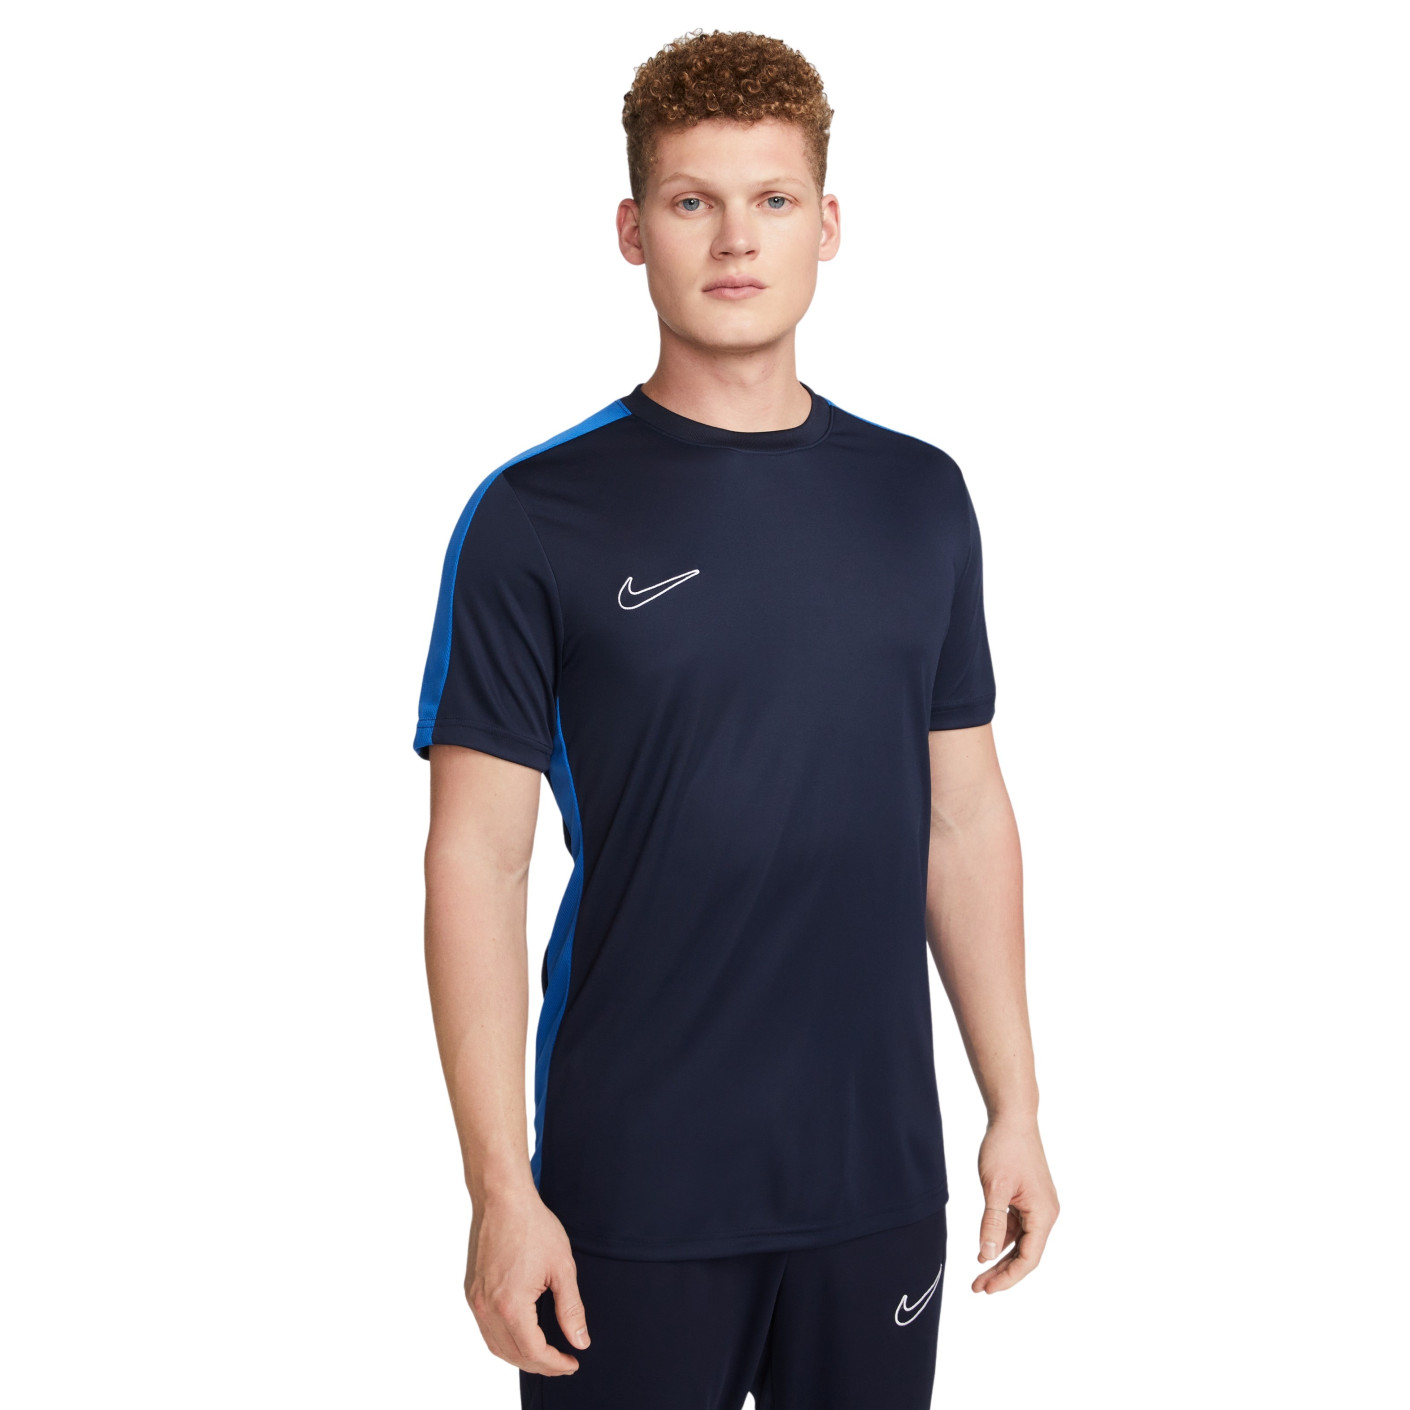 Maillot Nike Dri-FIT Academy - Nike - Maillots - Entraînement